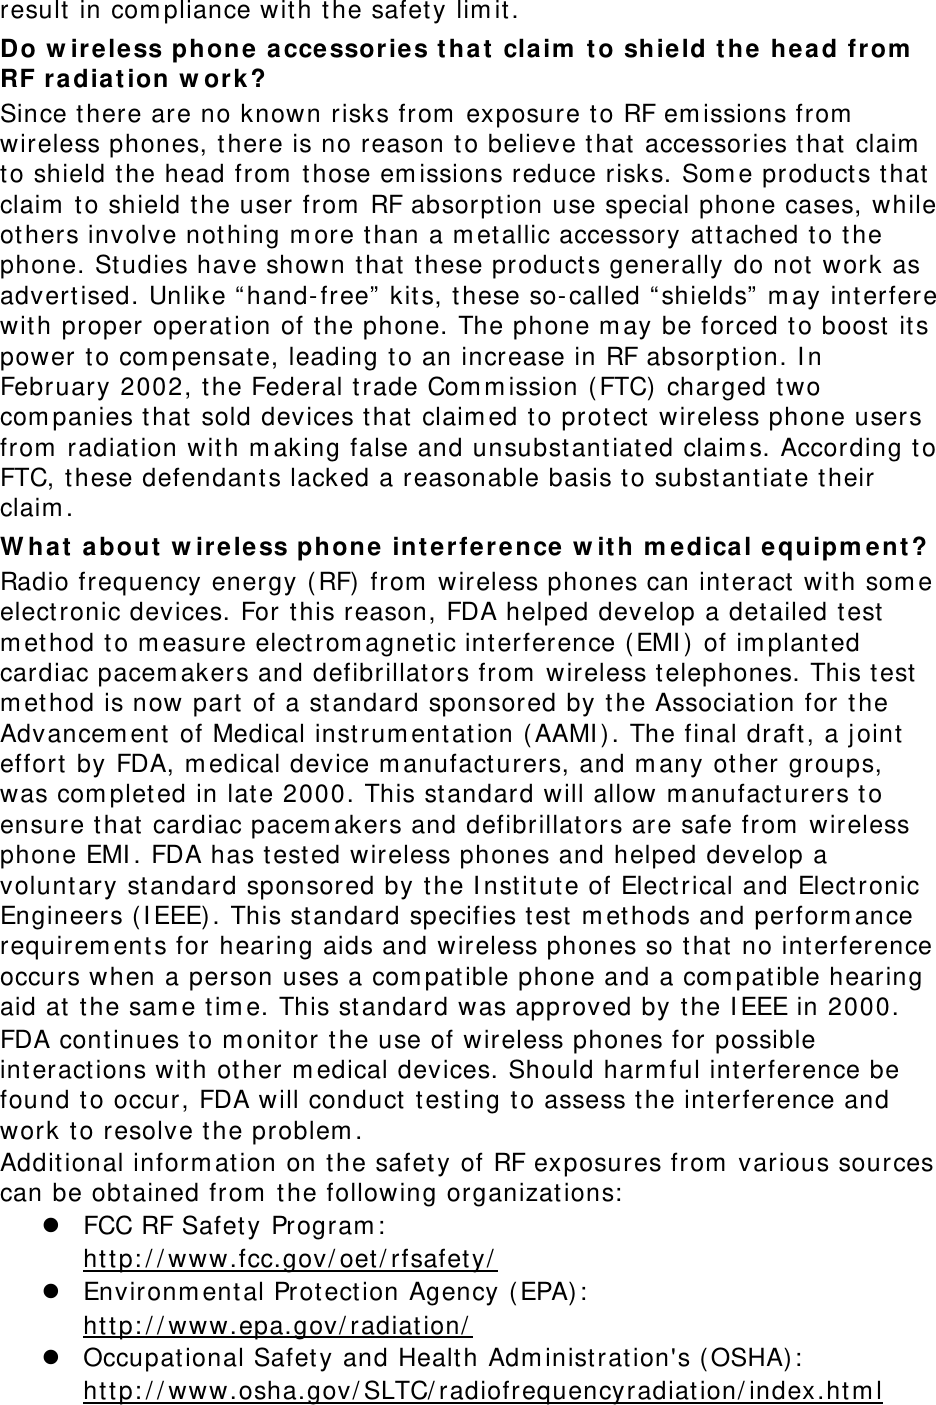 result in compliance with the safety limit. Do wireless phone accessories that claim to shield the head from RF radiation work? Since there are no known risks from exposure to RF emissions from wireless phones, there is no reason to believe that accessories that claim to shield the head from those emissions reduce risks. Some products that claim to shield the user from RF absorption use special phone cases, while others involve nothing more than a metallic accessory attached to the phone. Studies have shown that these products generally do not work as advertised. Unlike “hand-free” kits, these so-called “shields” may interfere with proper operation of the phone. The phone may be forced to boost its power to compensate, leading to an increase in RF absorption. In February 2002, the Federal trade Commission (FTC) charged two companies that sold devices that claimed to protect wireless phone users from radiation with making false and unsubstantiated claims. According to FTC, these defendants lacked a reasonable basis to substantiate their claim. What about wireless phone interference with medical equipment? Radio frequency energy (RF) from wireless phones can interact with some electronic devices. For this reason, FDA helped develop a detailed test method to measure electromagnetic interference (EMI) of implanted cardiac pacemakers and defibrillators from wireless telephones. This test method is now part of a standard sponsored by the Association for the Advancement of Medical instrumentation (AAMI). The final draft, a joint effort by FDA, medical device manufacturers, and many other groups, was completed in late 2000. This standard will allow manufacturers to ensure that cardiac pacemakers and defibrillators are safe from wireless phone EMI. FDA has tested wireless phones and helped develop a voluntary standard sponsored by the Institute of Electrical and Electronic Engineers (IEEE). This standard specifies test methods and performance requirements for hearing aids and wireless phones so that no interference occurs when a person uses a compatible phone and a compatible hearing aid at the same time. This standard was approved by the IEEE in 2000. FDA continues to monitor the use of wireless phones for possible interactions with other medical devices. Should harmful interference be found to occur, FDA will conduct testing to assess the interference and work to resolve the problem. Additional information on the safety of RF exposures from various sources can be obtained from the following organizations:  FCC RF Safety Program:  http://www.fcc.gov/oet/rfsafety/  Environmental Protection Agency (EPA):  http://www.epa.gov/radiation/  Occupational Safety and Health Administration&apos;s (OSHA):        http://www.osha.gov/SLTC/radiofrequencyradiation/index.html 